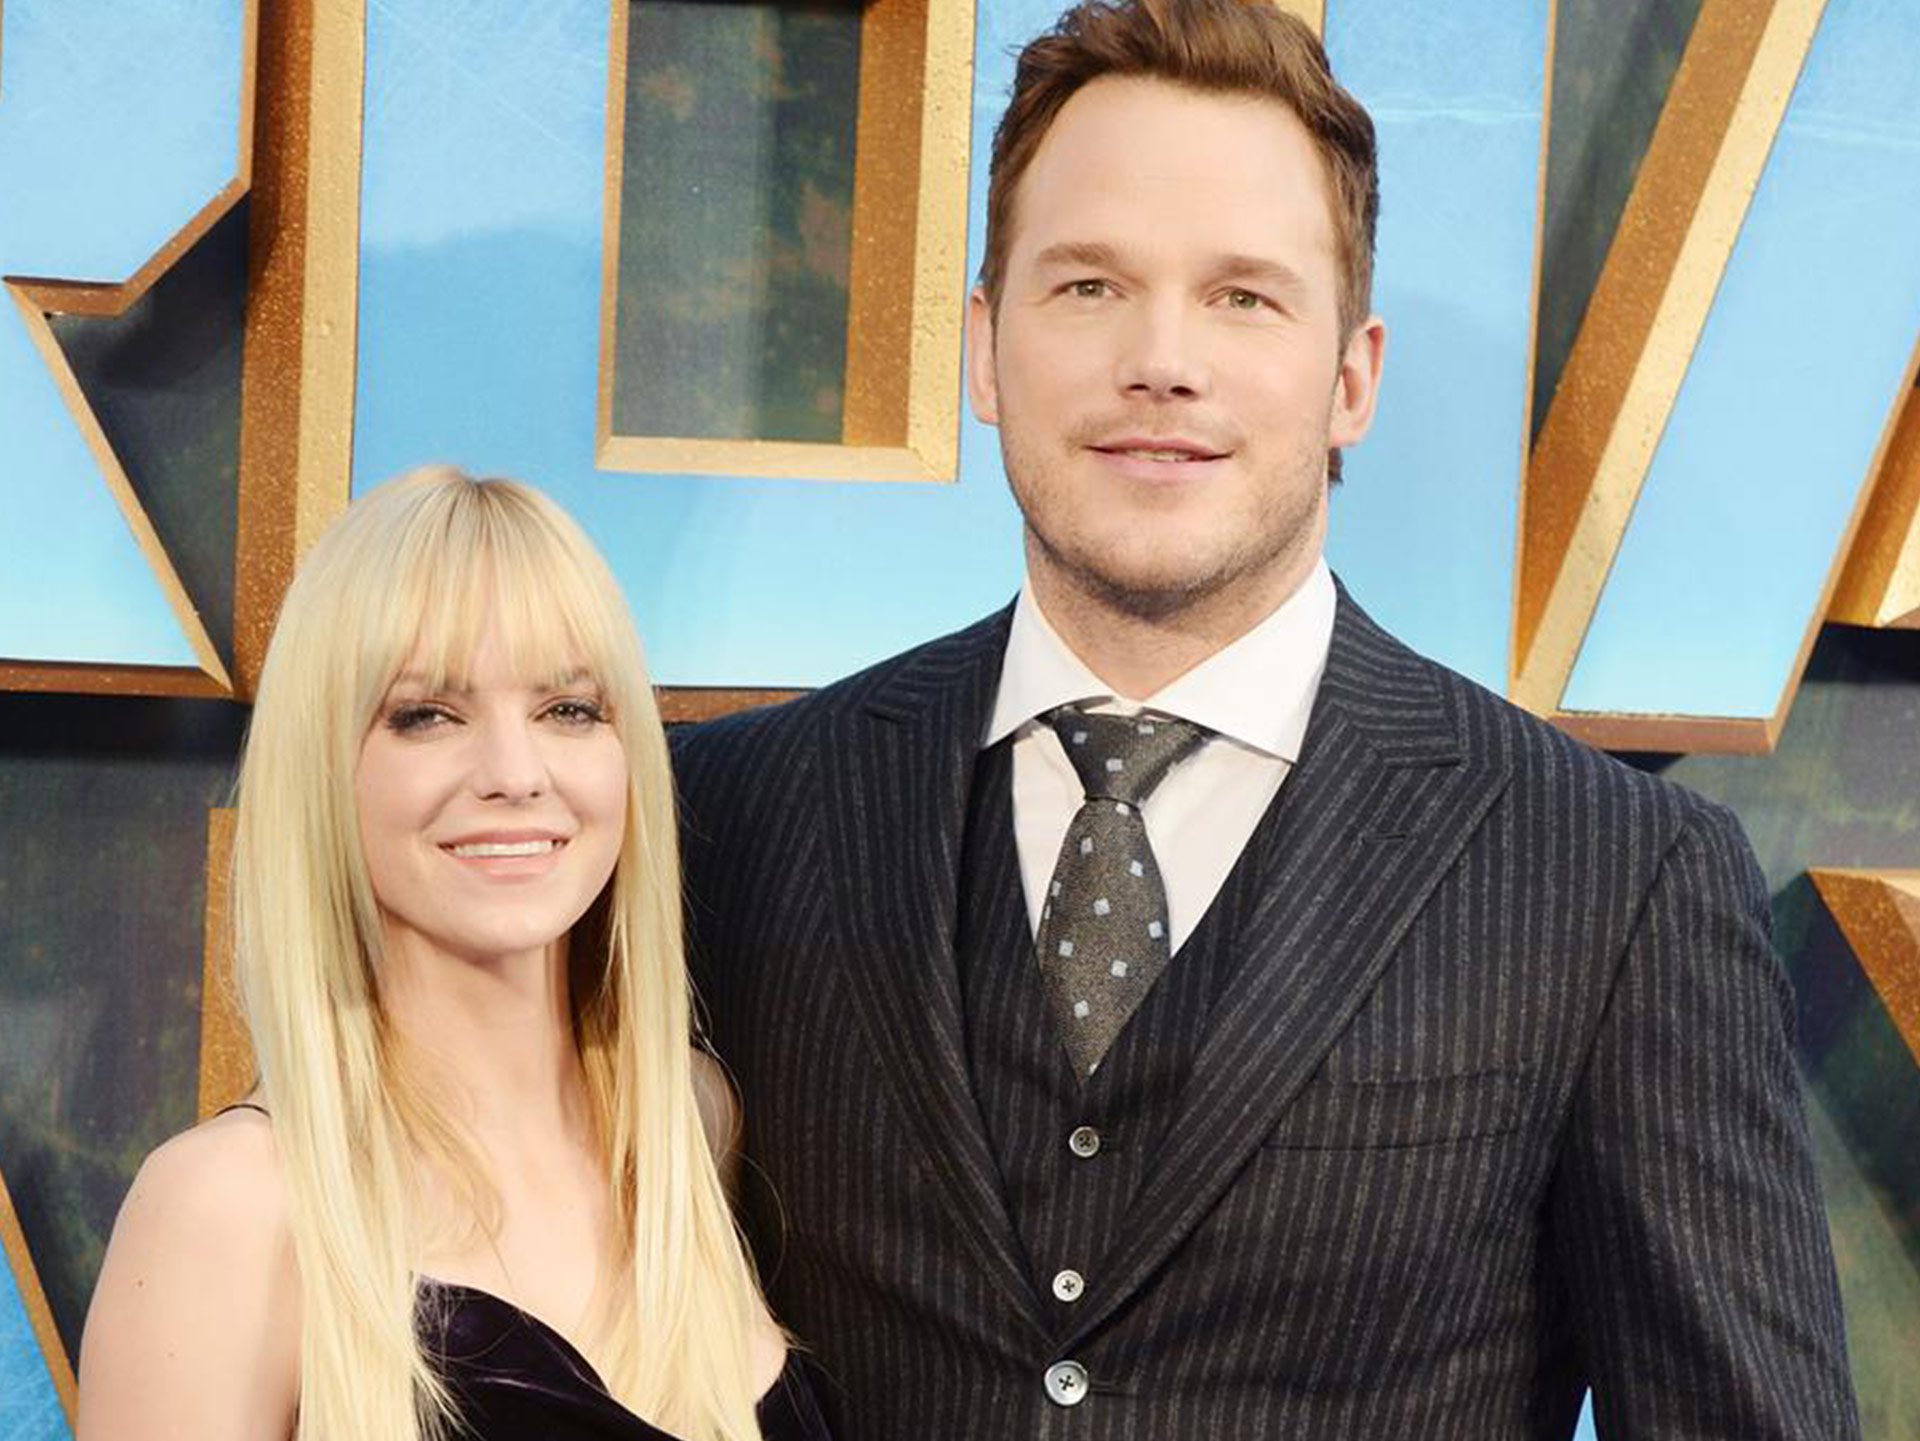 Chris Pratt thinks Anna Faris was awesome at the Emmys